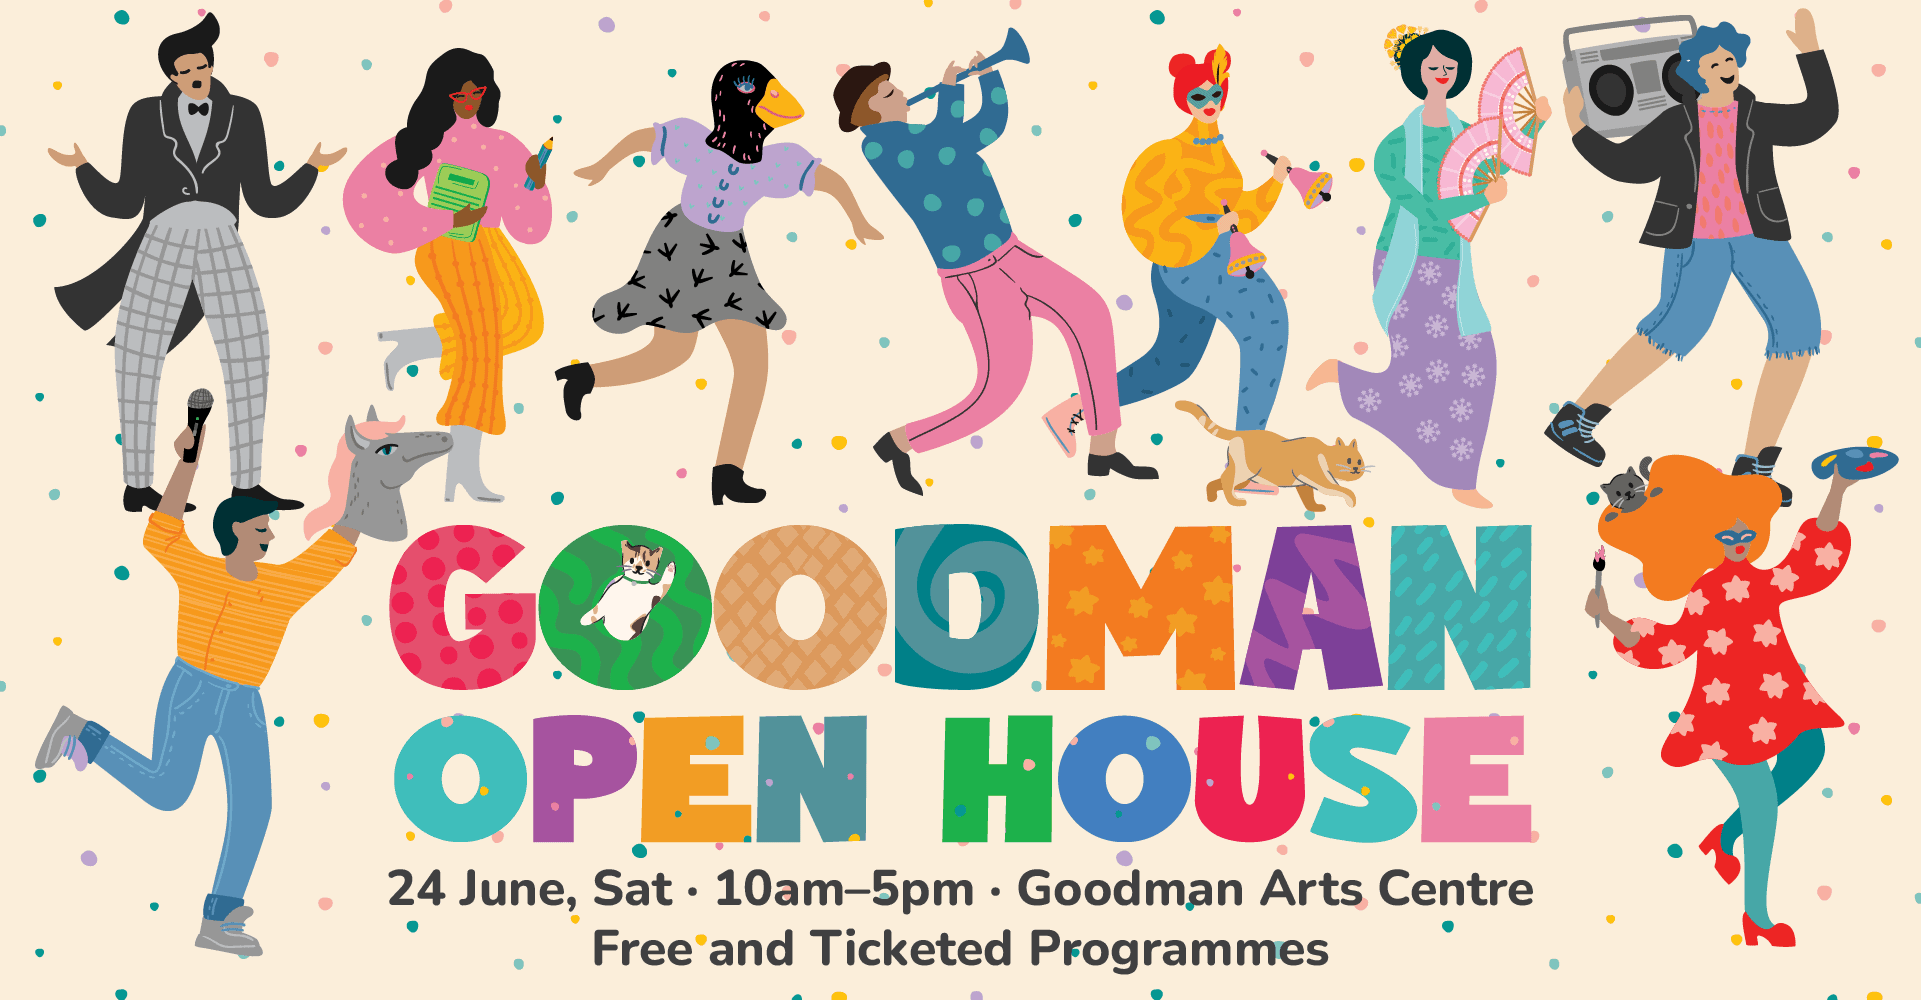 Goodman Open House @ Goodman Arts Centre. Image courtesy of Arts House Limited